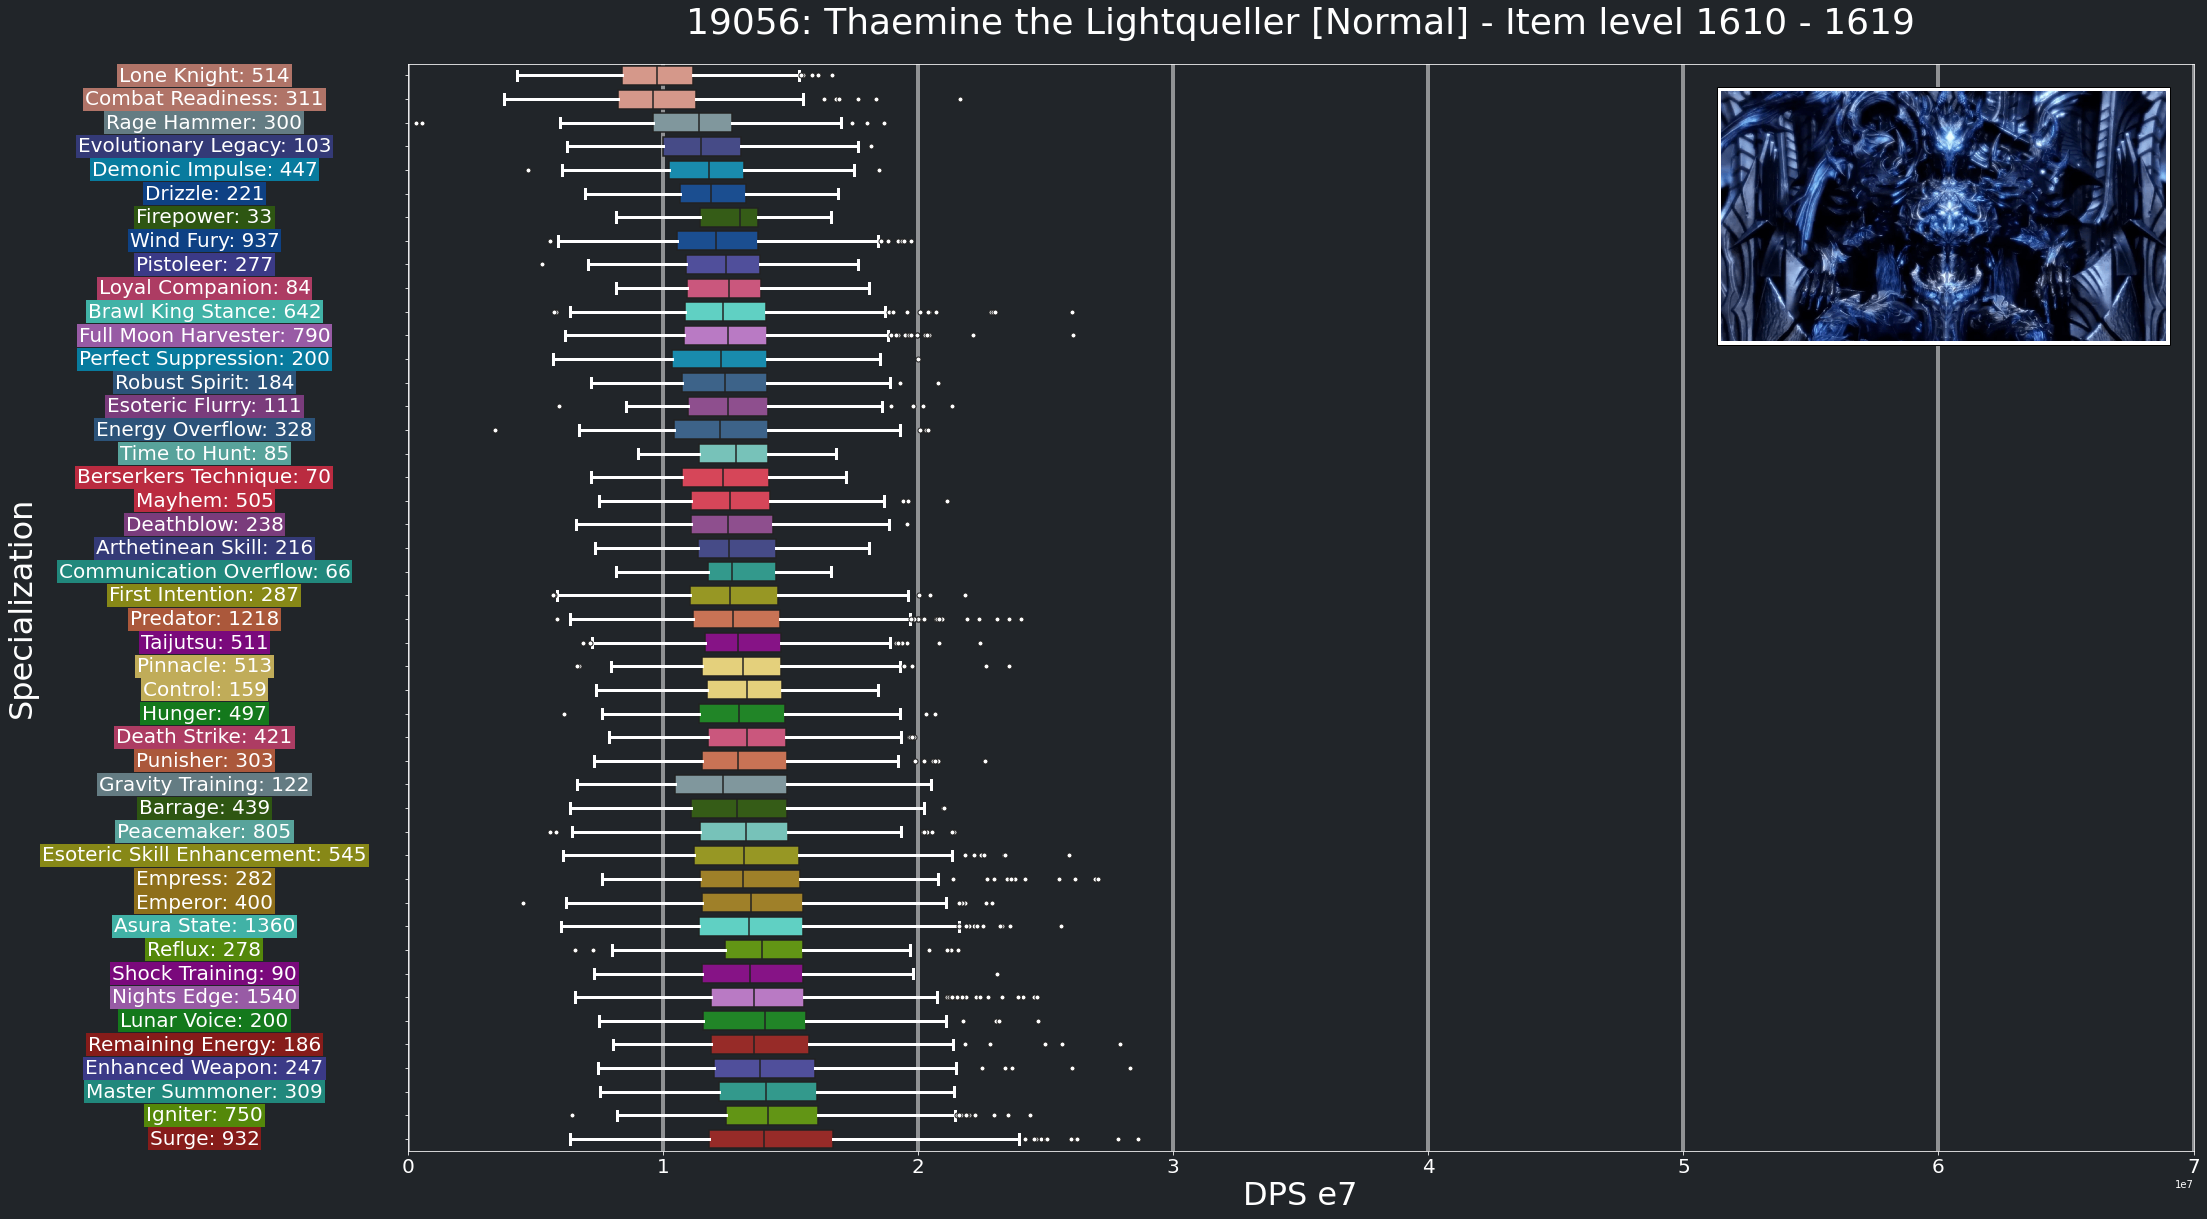 DPS_ThaeminetheLightquellerNormal_1610to1620_Q75.png